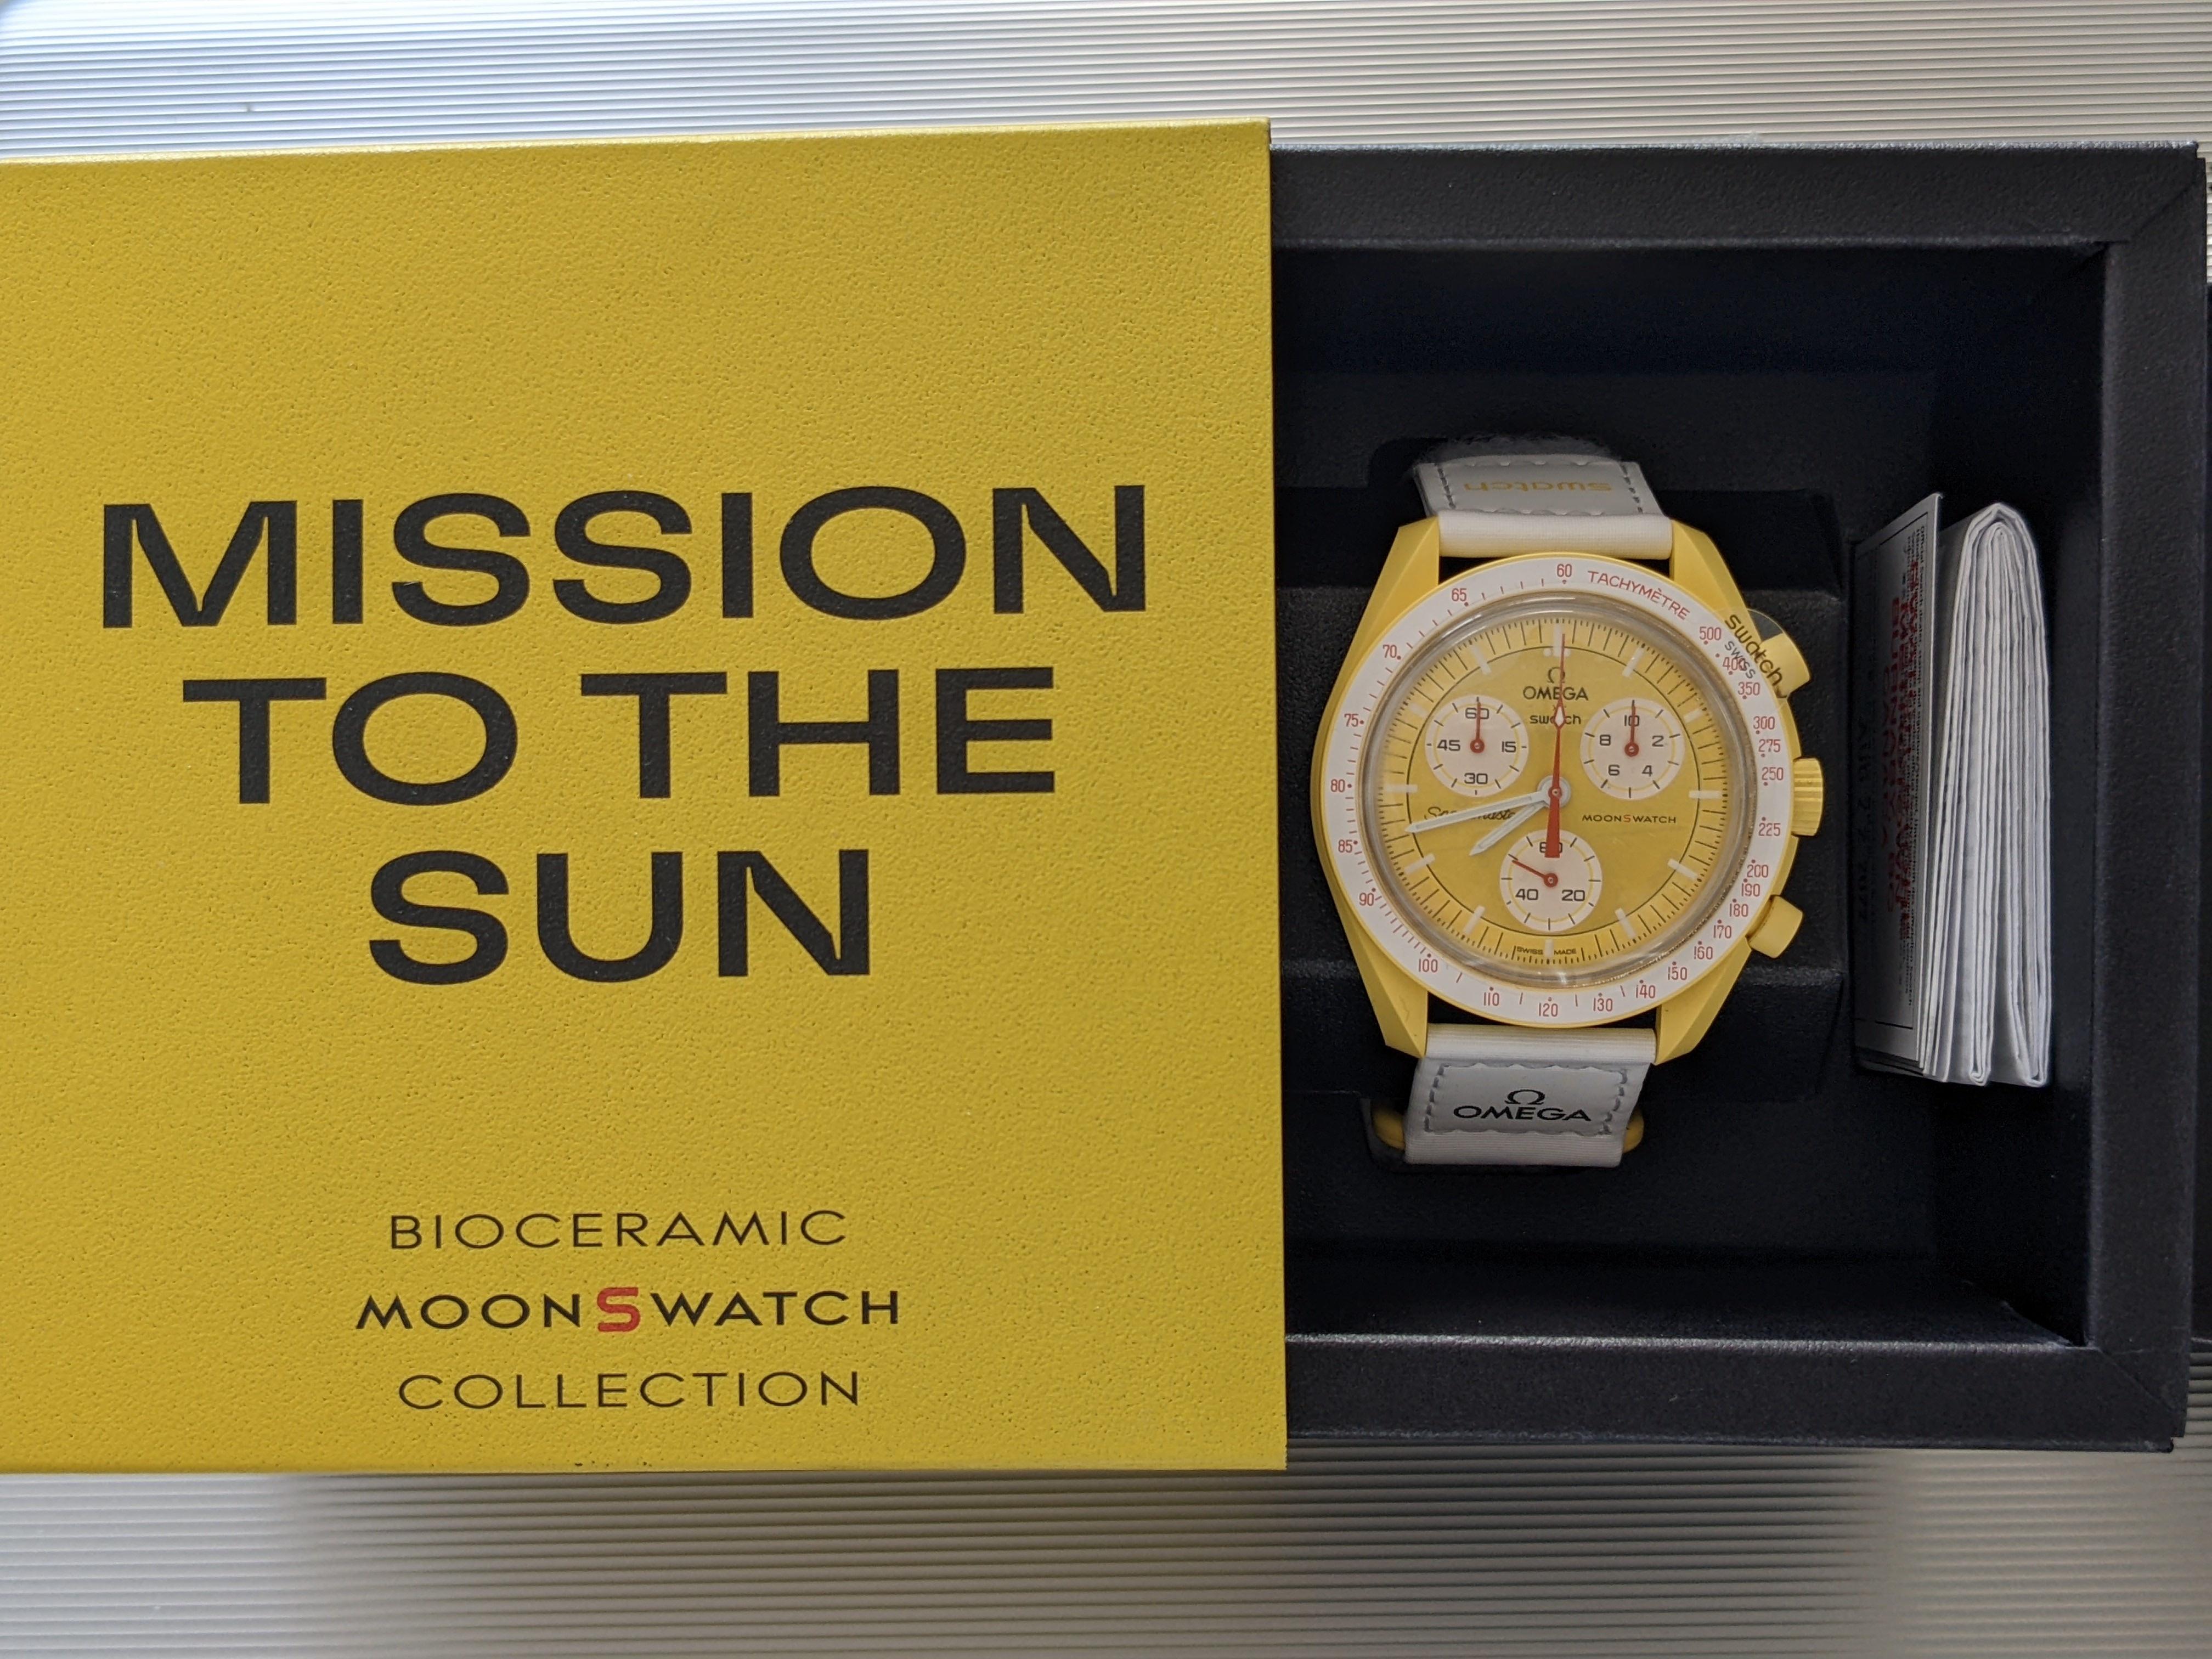 350 USD] New Swatch x Omega Moonswatch Mission to the Sun